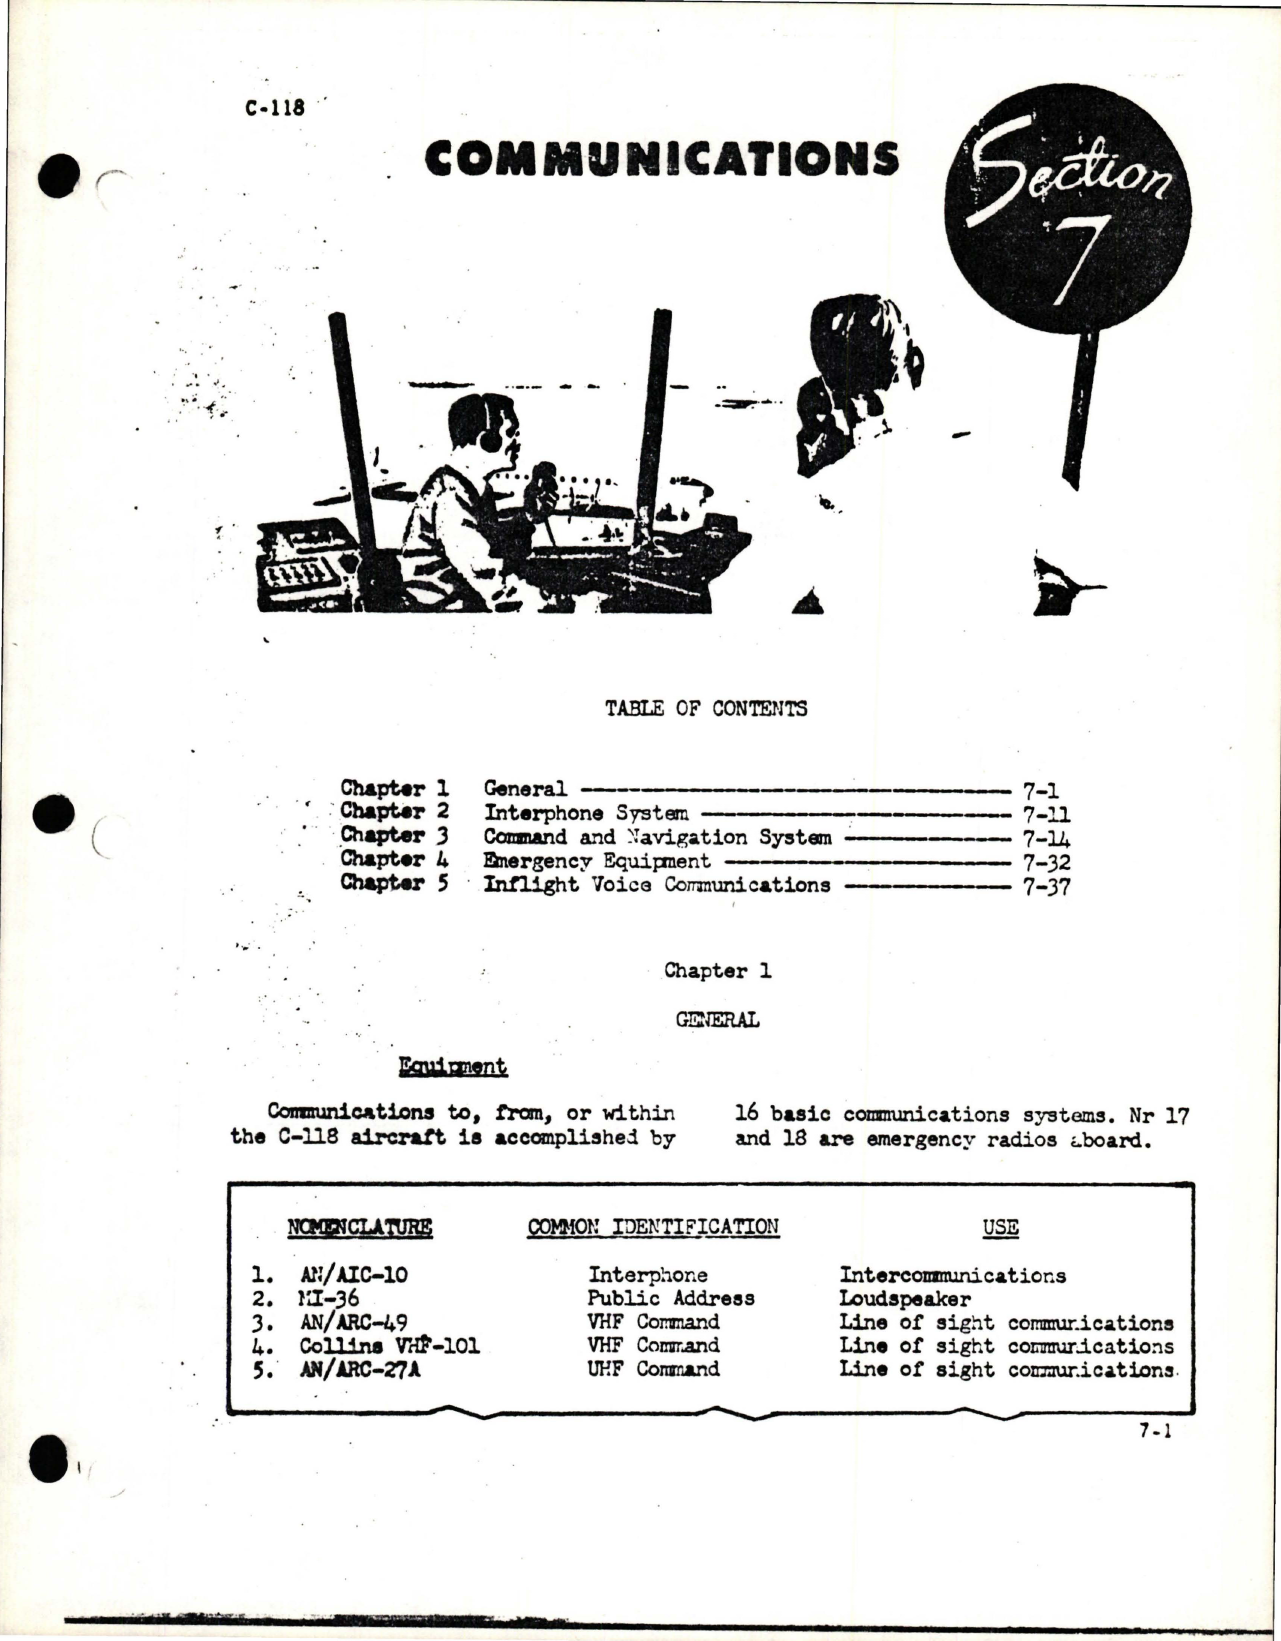 Sample page 1 from AirCorps Library document: Communications for C-118 - Section 7